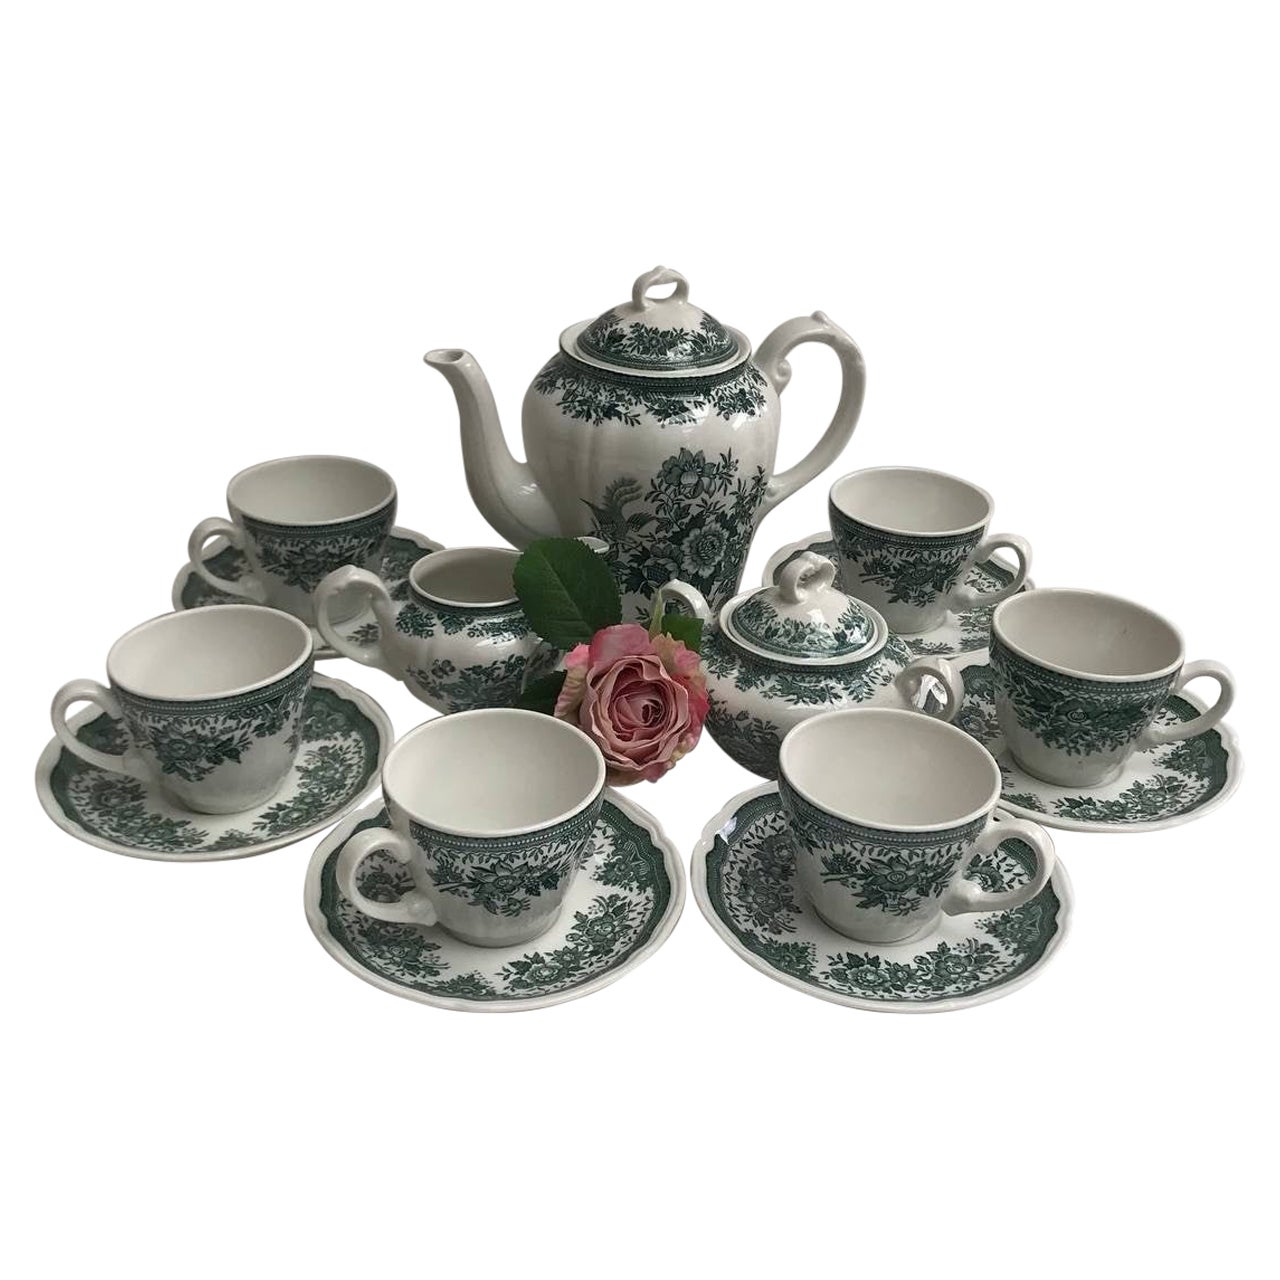 Coffee Service from Villeroy & Boch, Set of 15